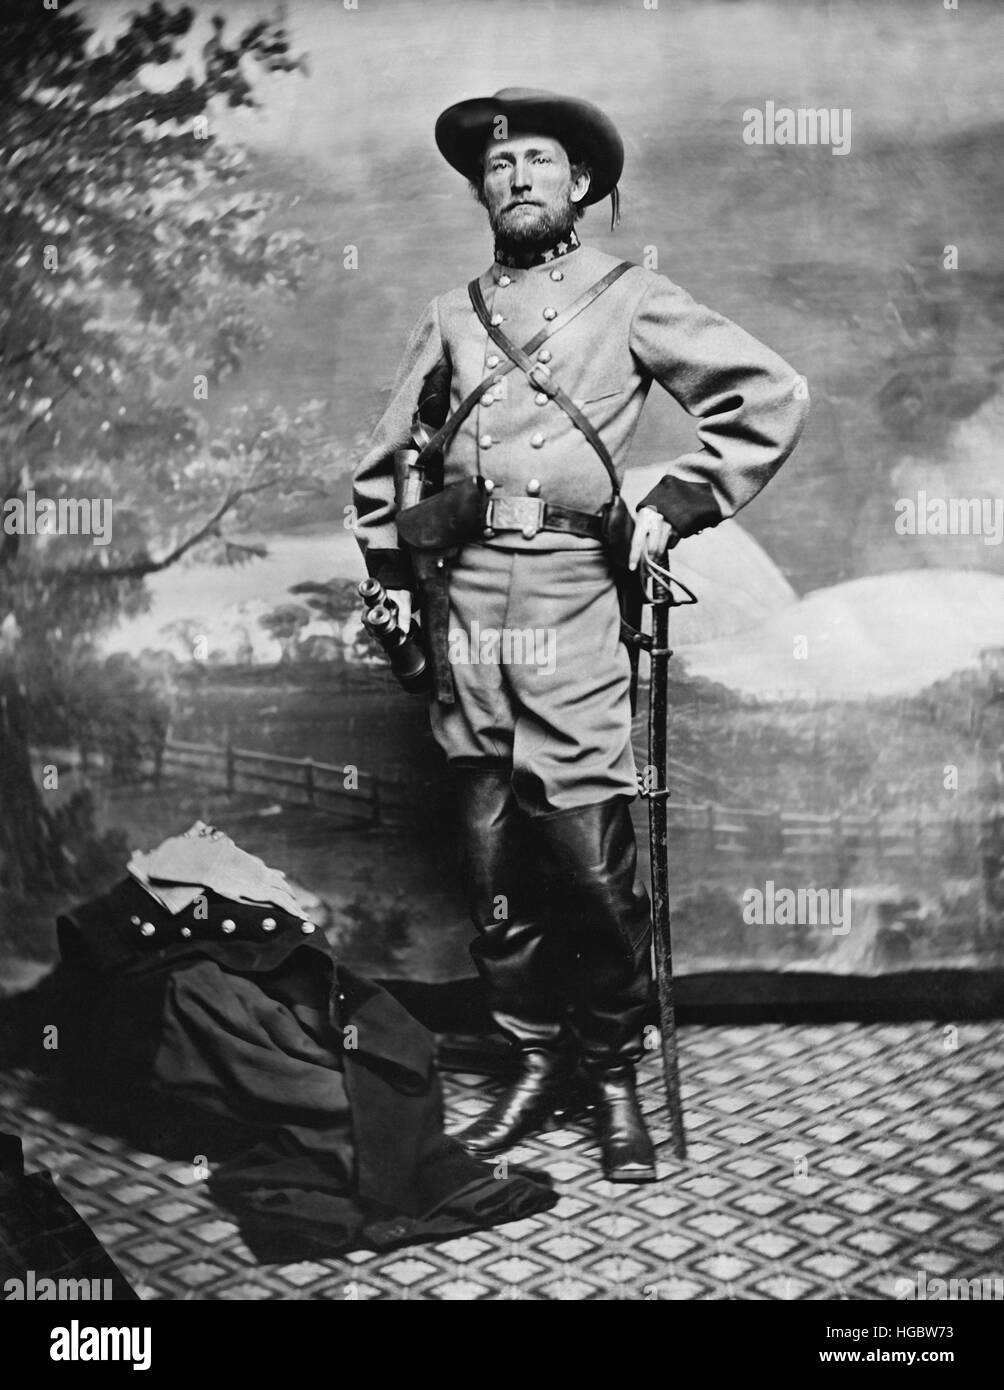 Confederate Army Colonel John S. Mosby during the American Civil War. Stock Photo